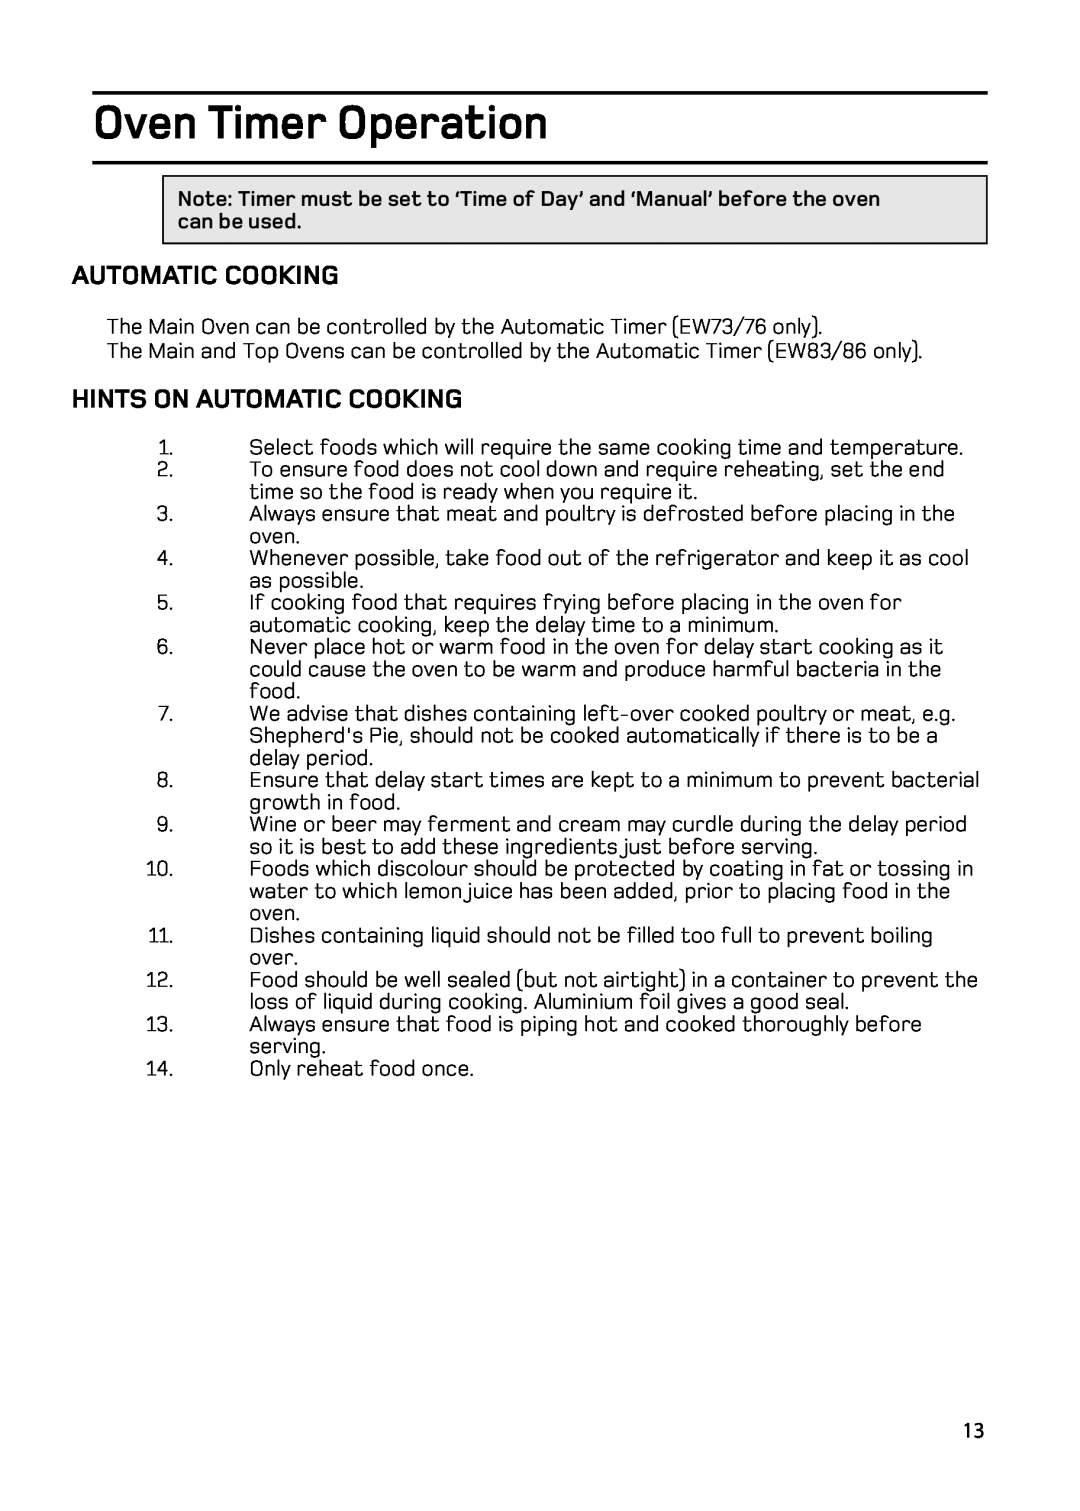 Hotpoint EW83, EW86, EW73, EW76 manual Oven Timer Operation, Hints On Automatic Cooking 